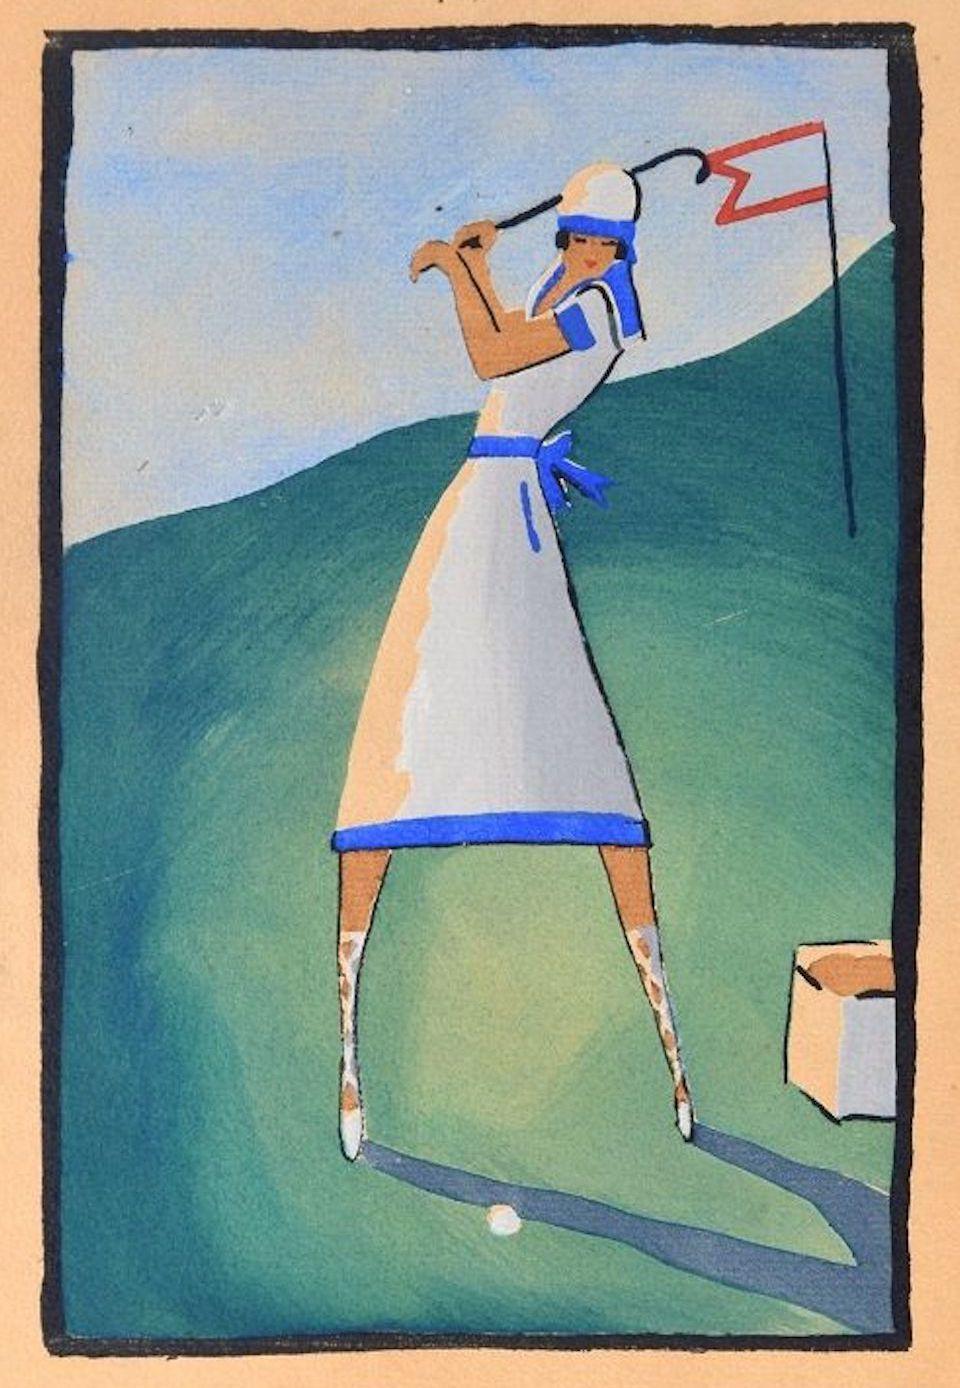 Unknown Figurative Print - Golf Player / Woodcut Hand Colored in Tempera on Paper - Art Deco - 1920s